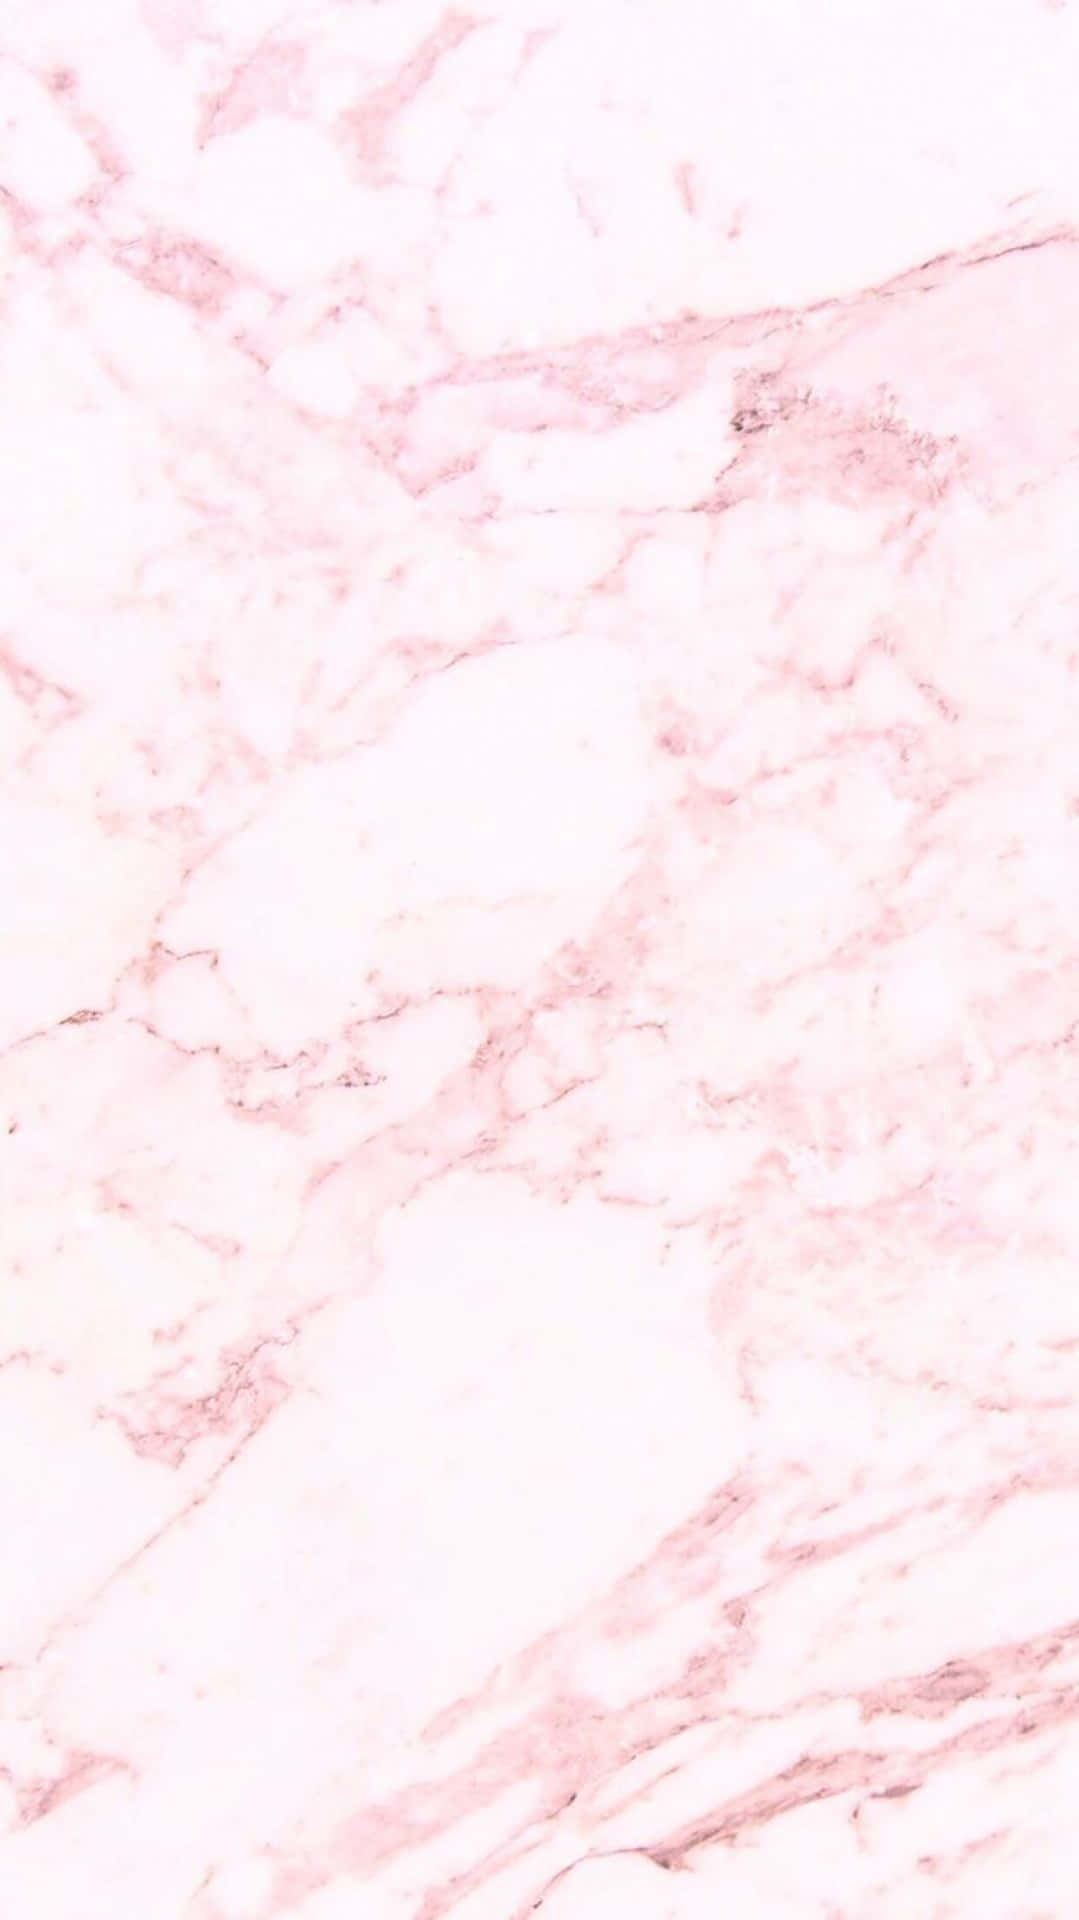 The Perfect Accessory - A Light Pink Iphone Wallpaper